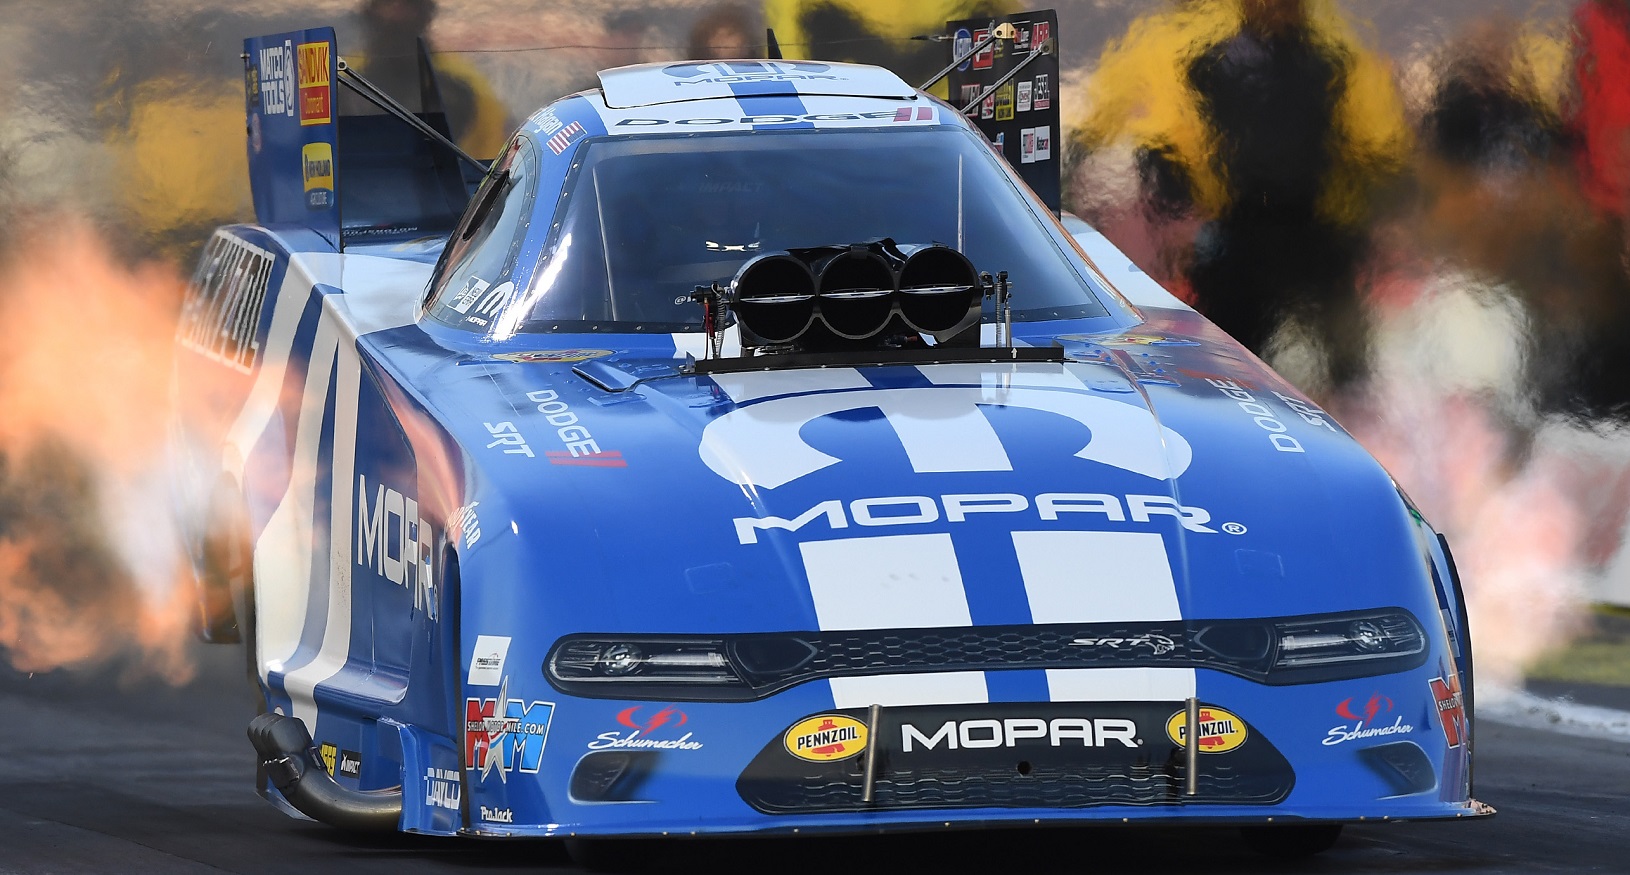 Mopar<sub>®</sub> Dodge//SRT<sup>®</sup> Funny Cars Seeded 1-2 for First Race Day of 2020 NHRA Season